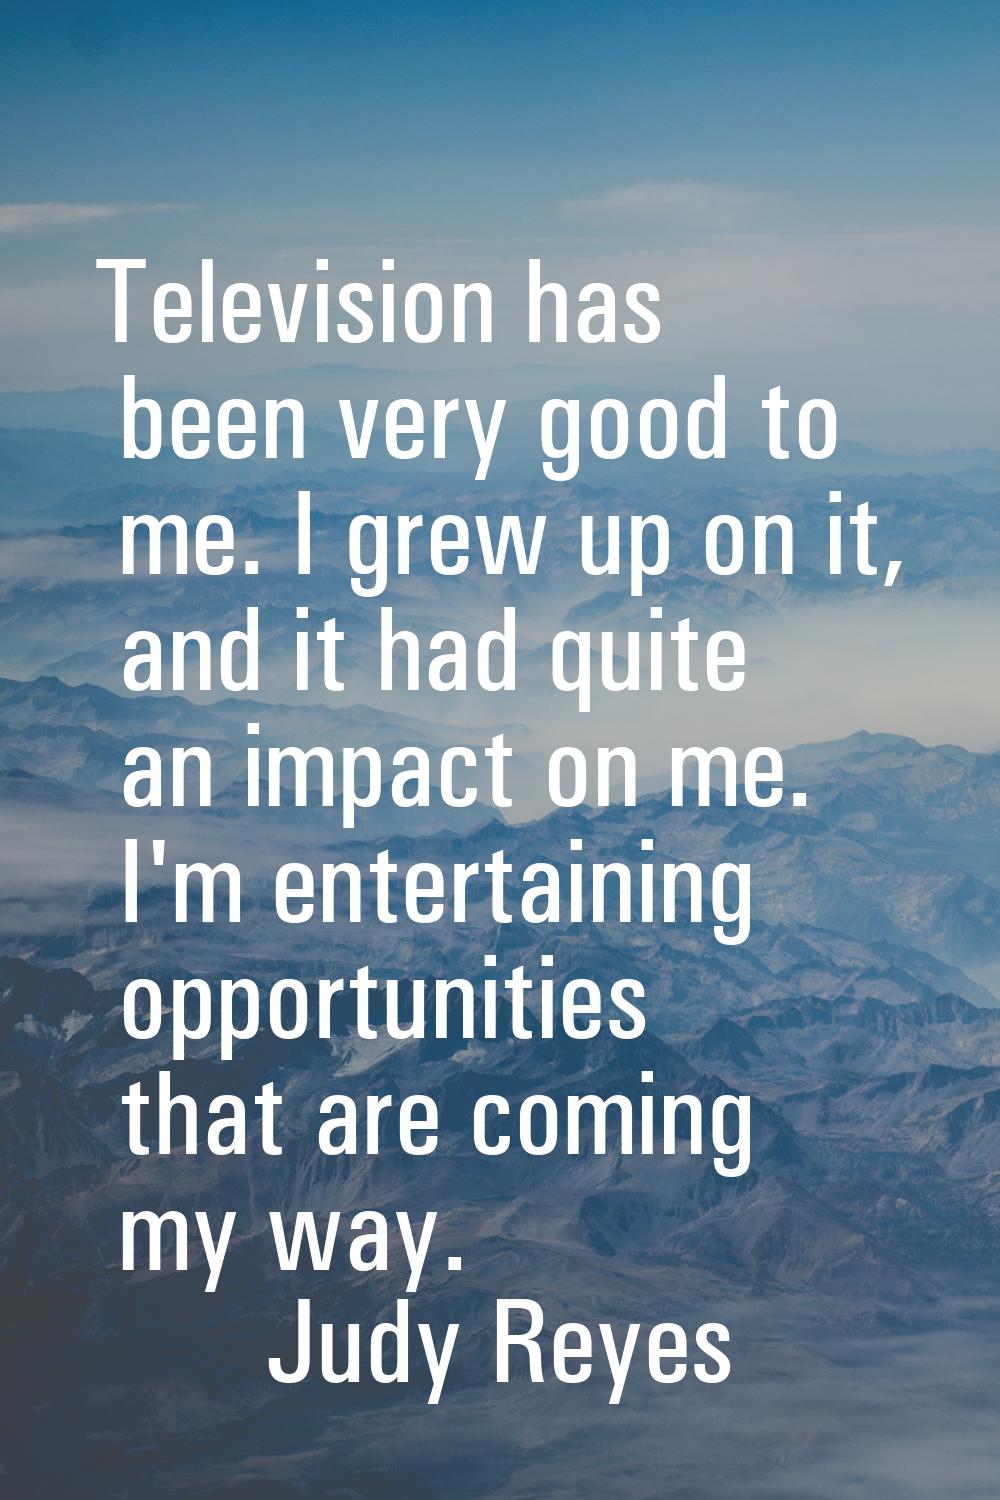 Television has been very good to me. I grew up on it, and it had quite an impact on me. I'm enterta